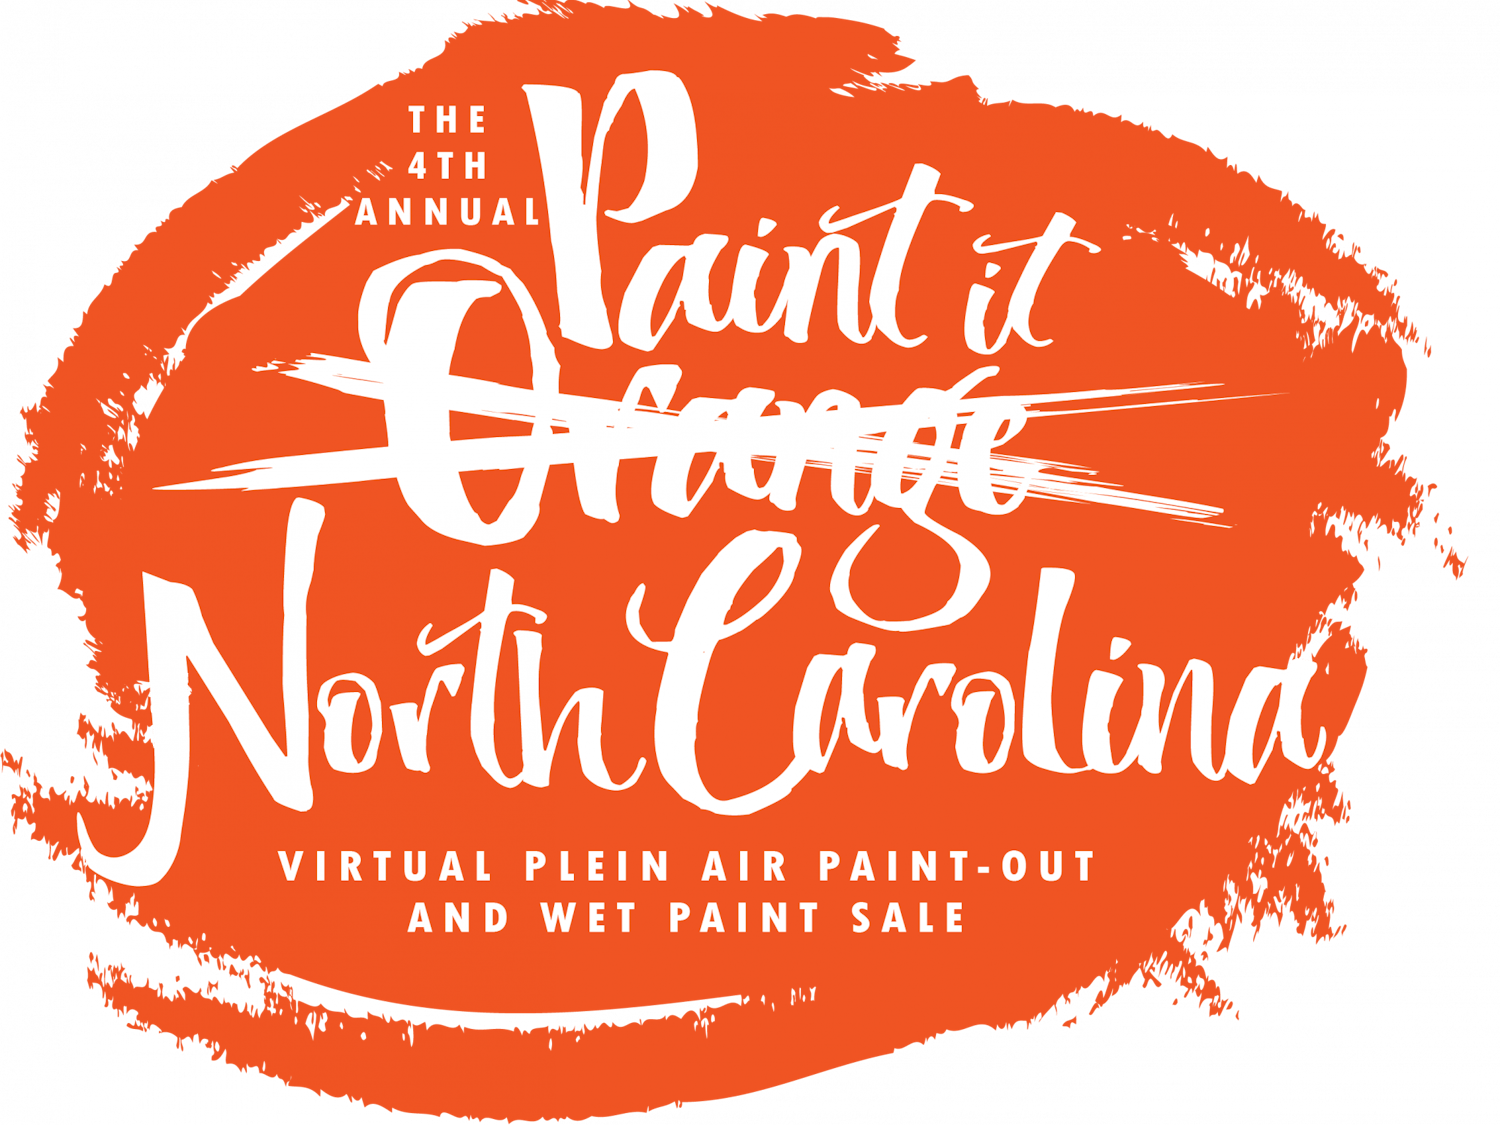 The fourth annual “Paint it Orange” event, hosted by the Orange County Arts Commission and the Hillsborough Arts Council, is adjusting to a new online format to continue supporting artists in North Carolina. Graphic courtesy of Katie Murray.&nbsp;